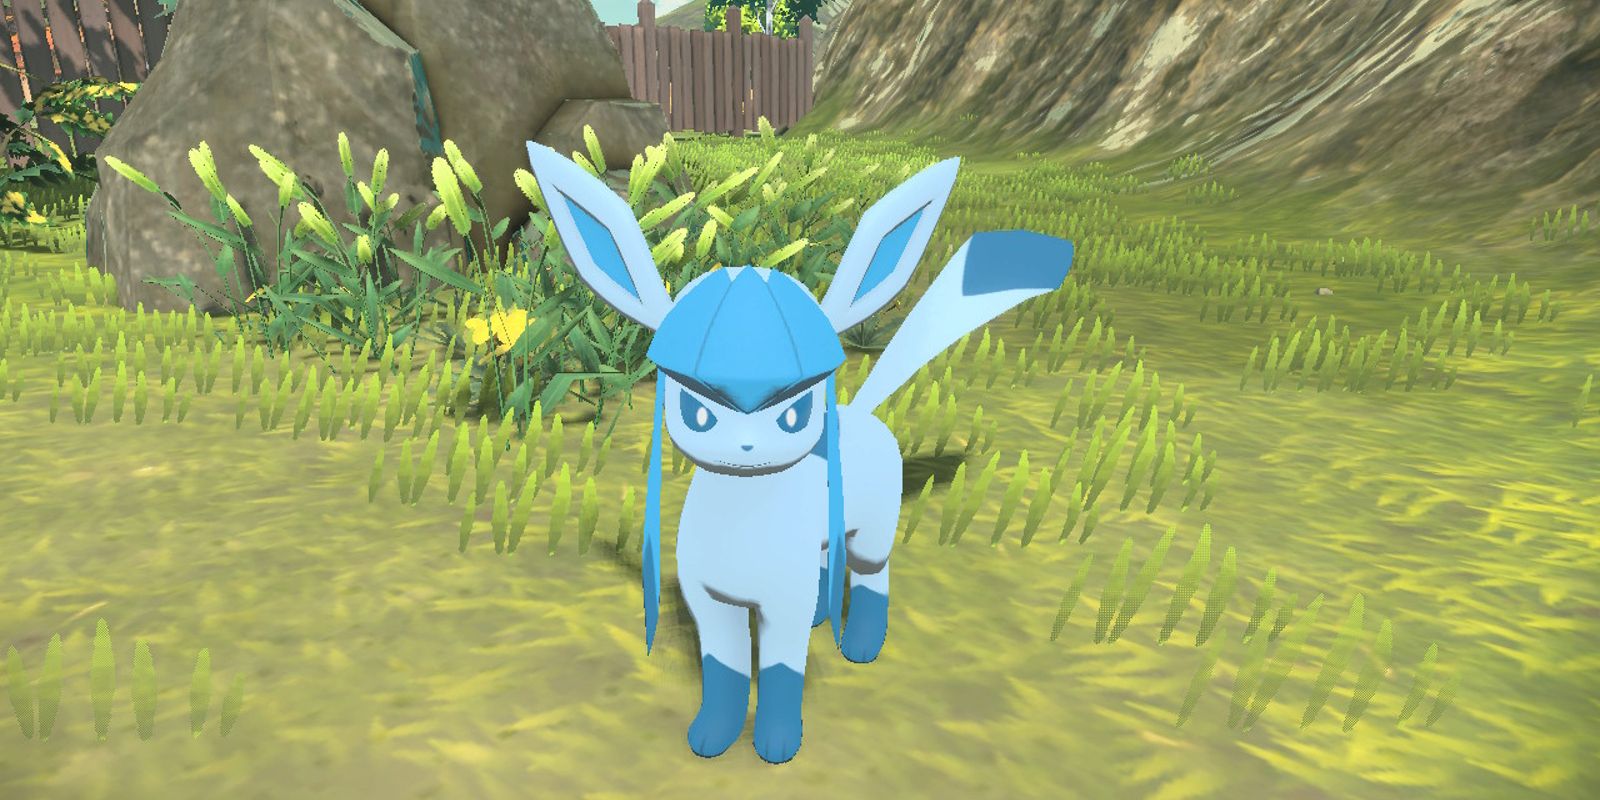 How To Catch (Or Evolve) Glaceon In Pokémon Legends: Arceus